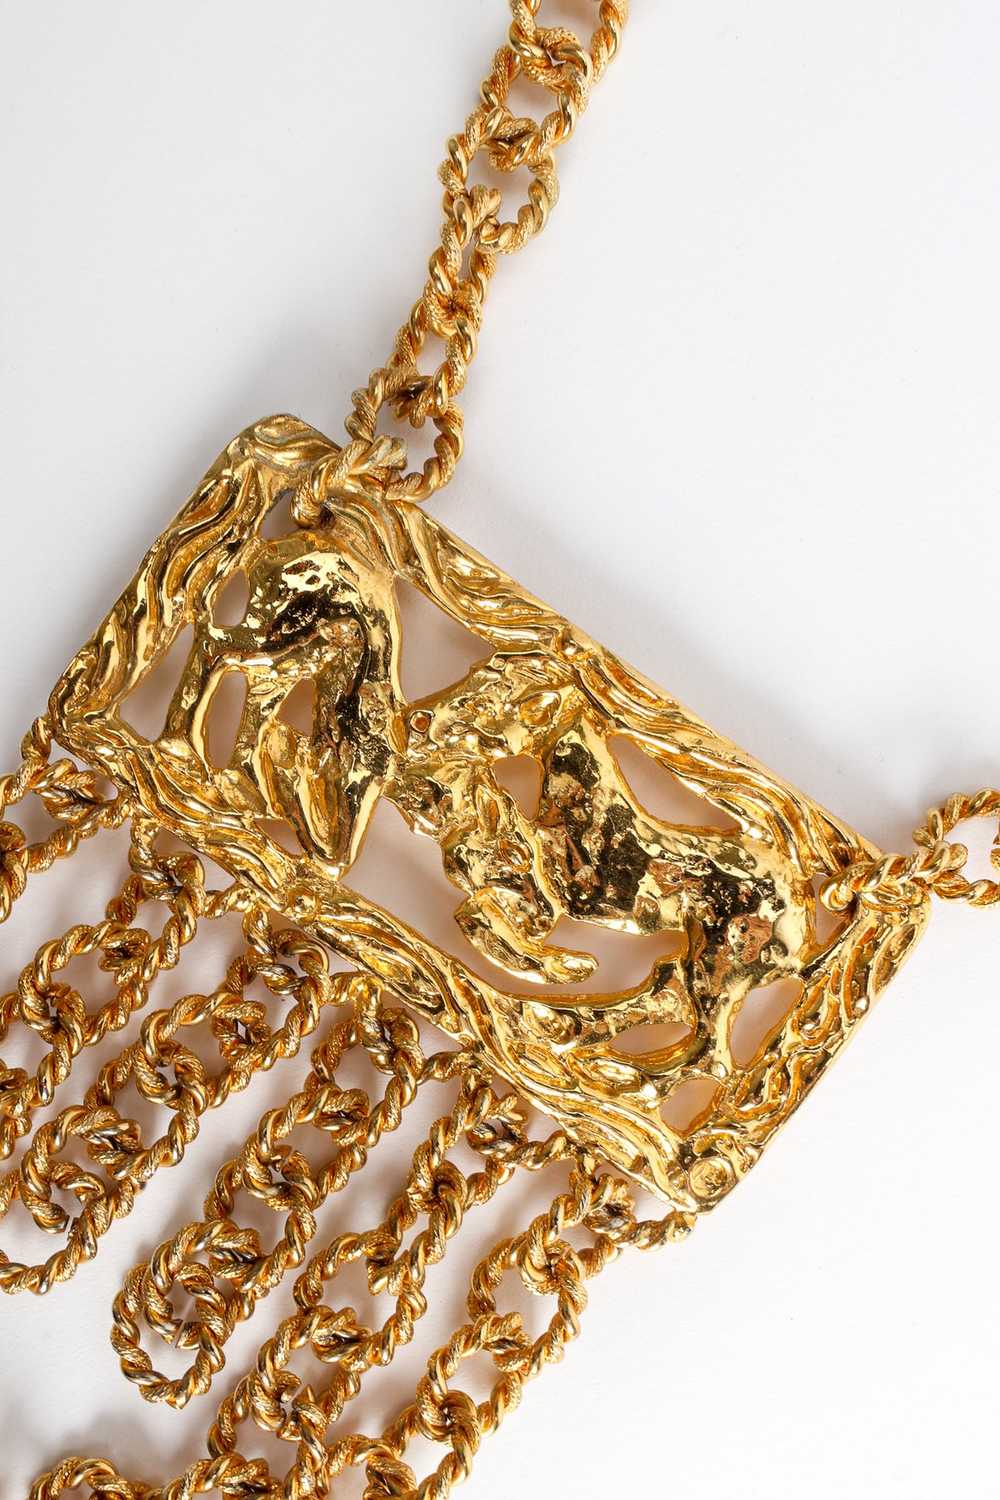 Golden Horse Pendant Rope Chain Necklace - image 5